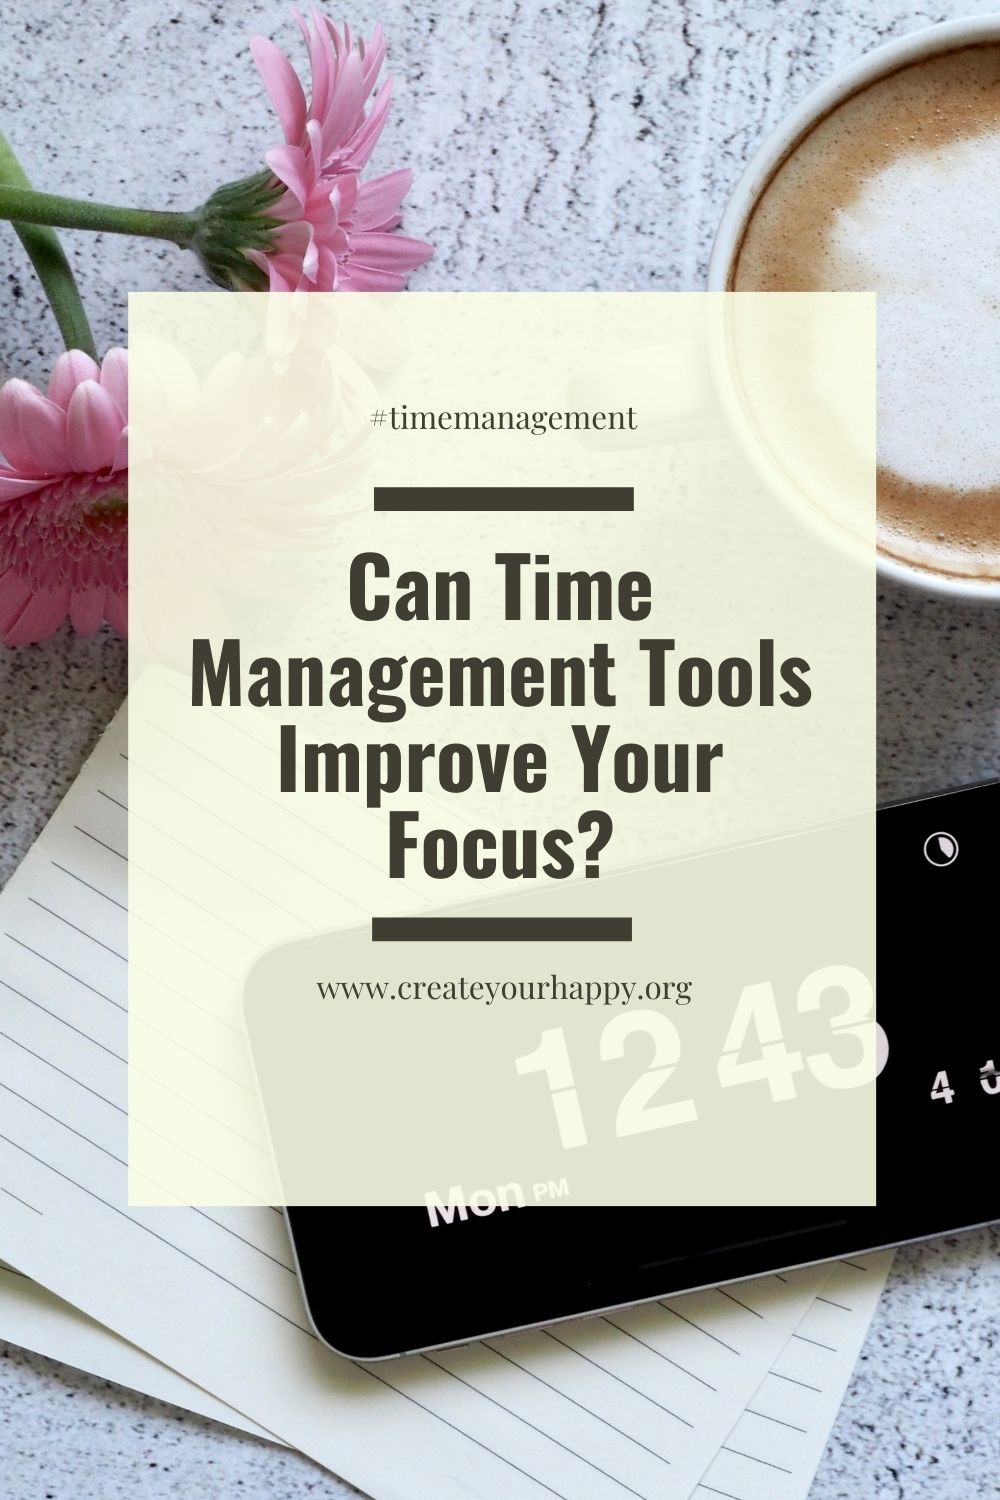 Can Time Management Tools Improve Your Focus?